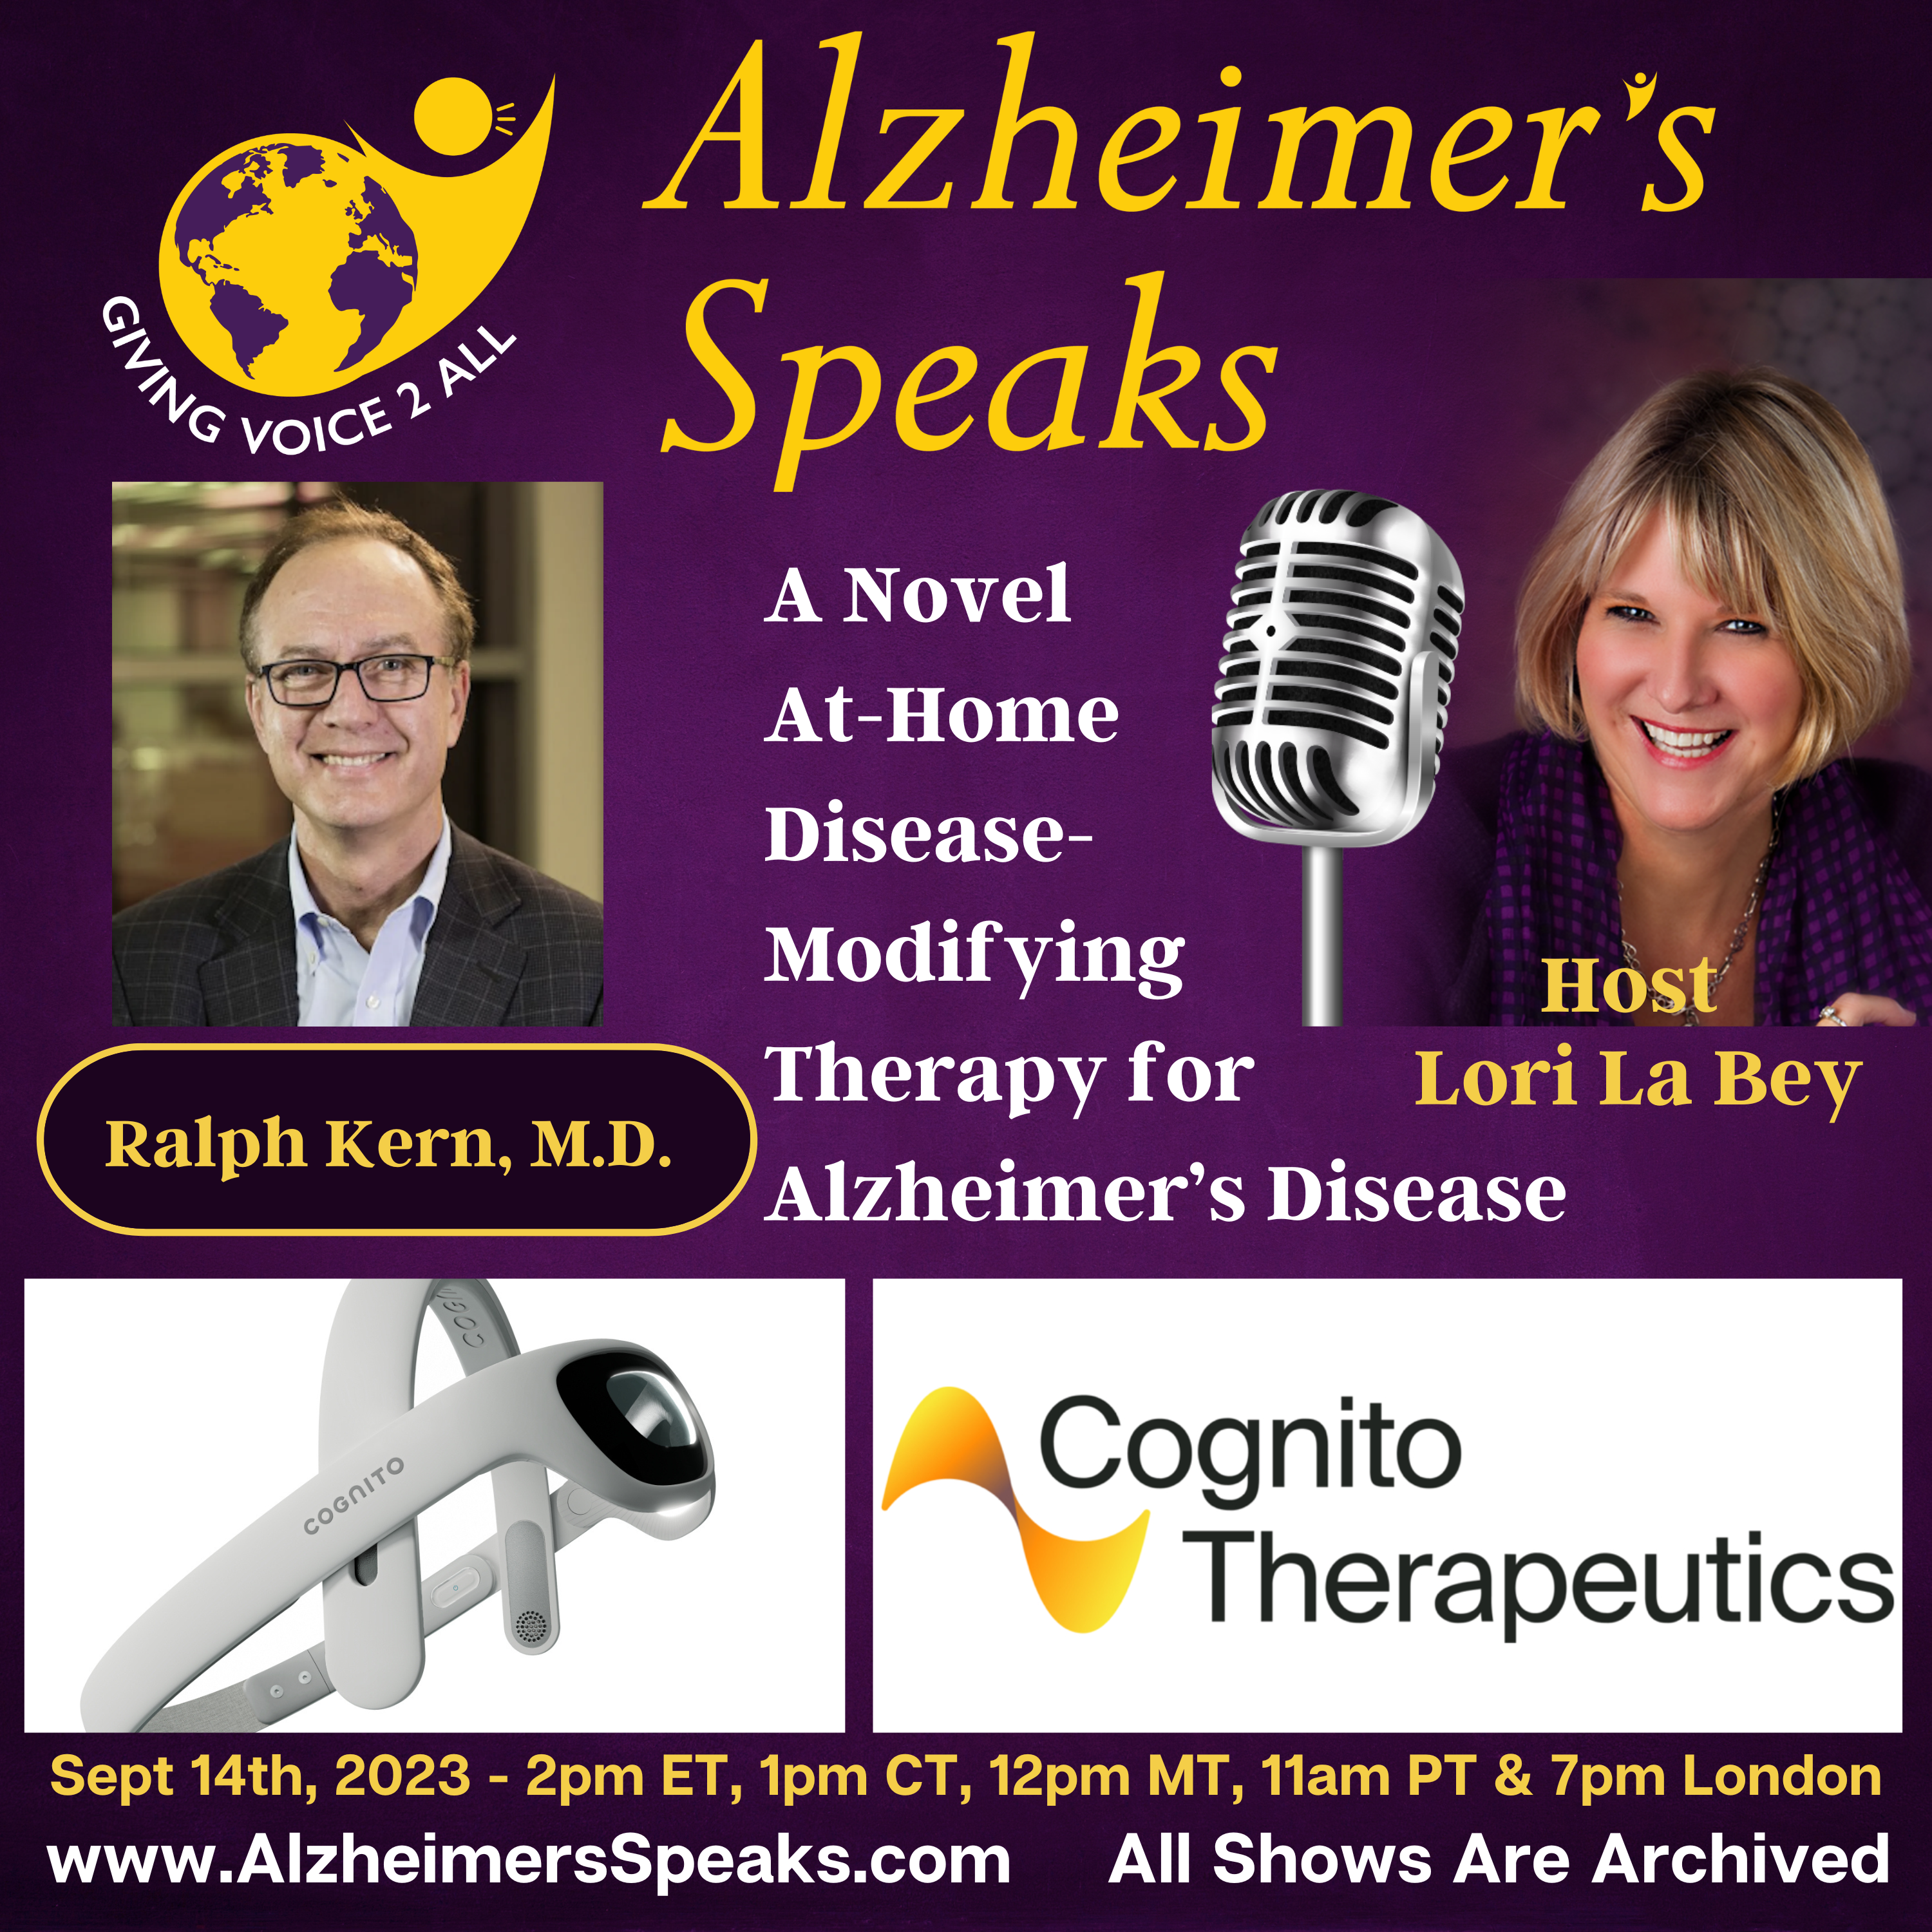 A Novel At-Home Disease-Modifying Therapy for Alzheimer’s Disease